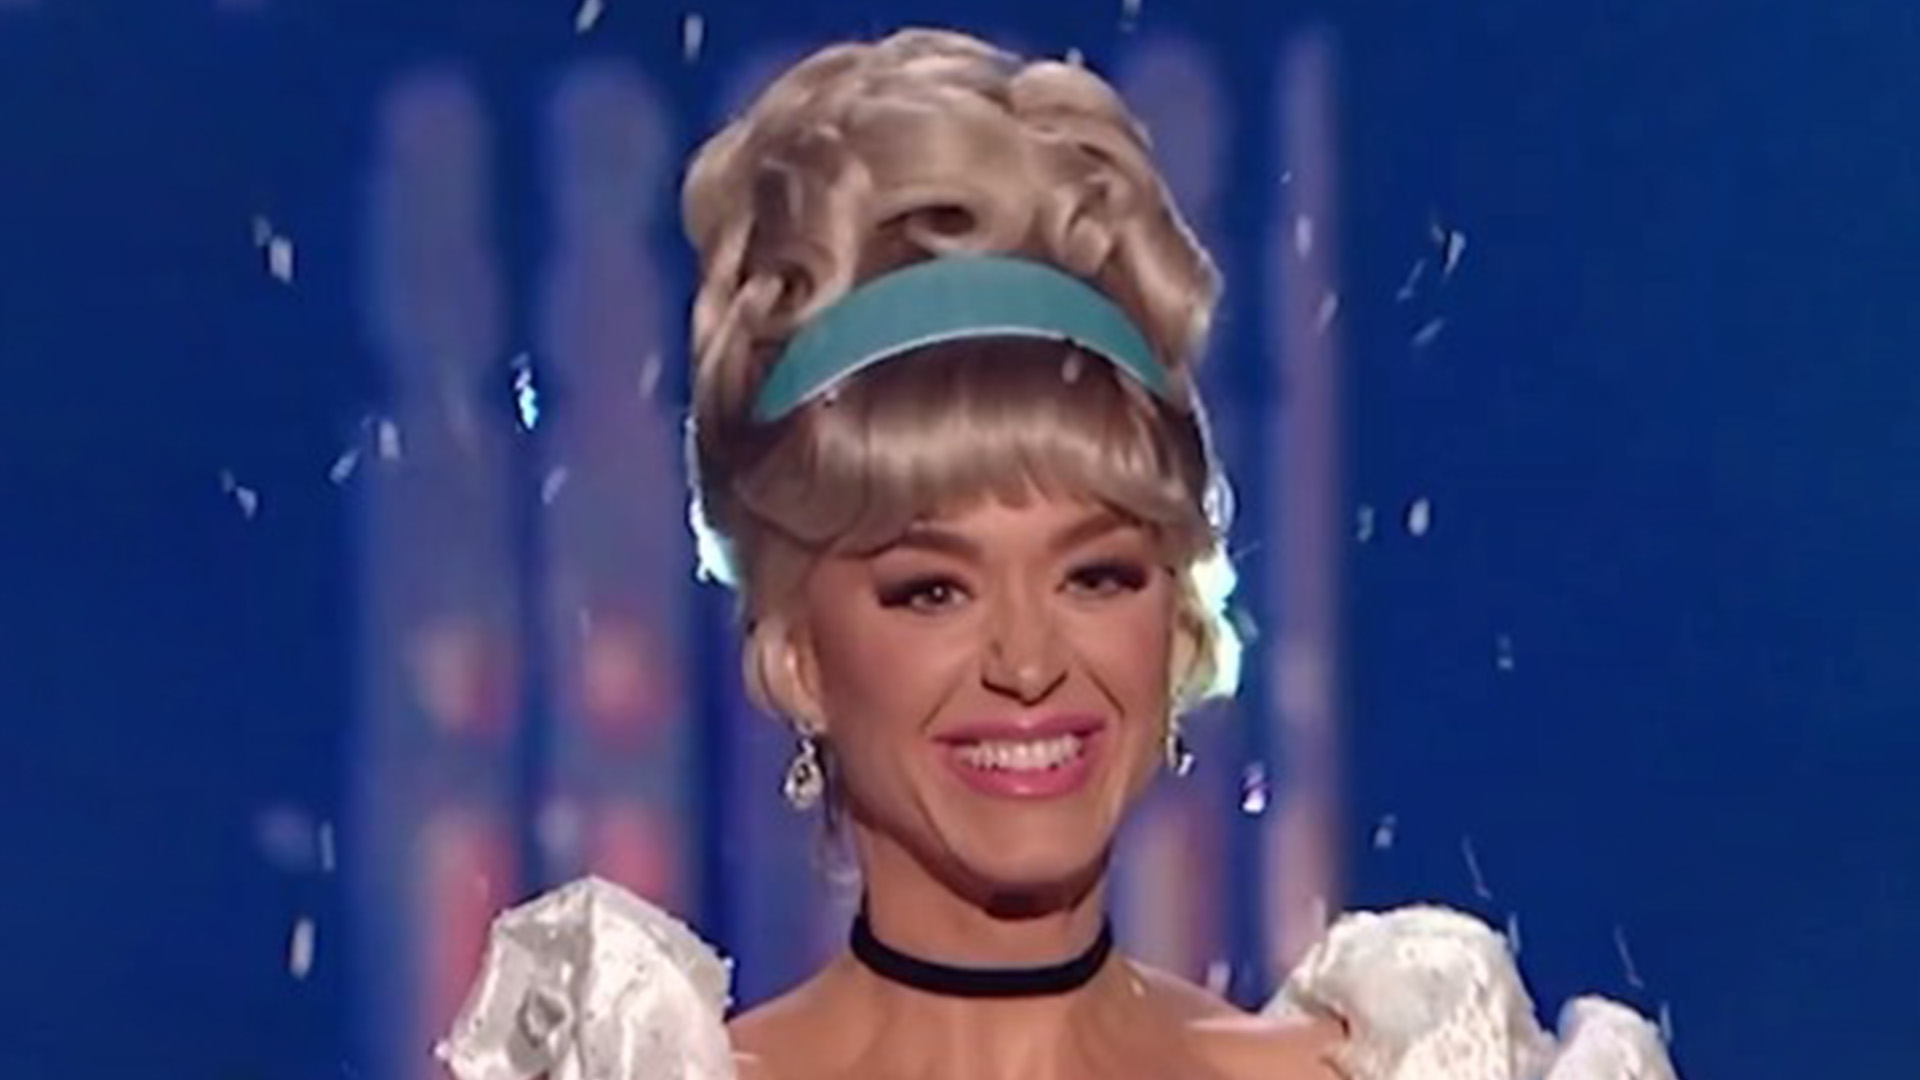 Katy Perry returns to blonde hair on American Idol as she transforms into Cinderella just a week before her final show [Video]